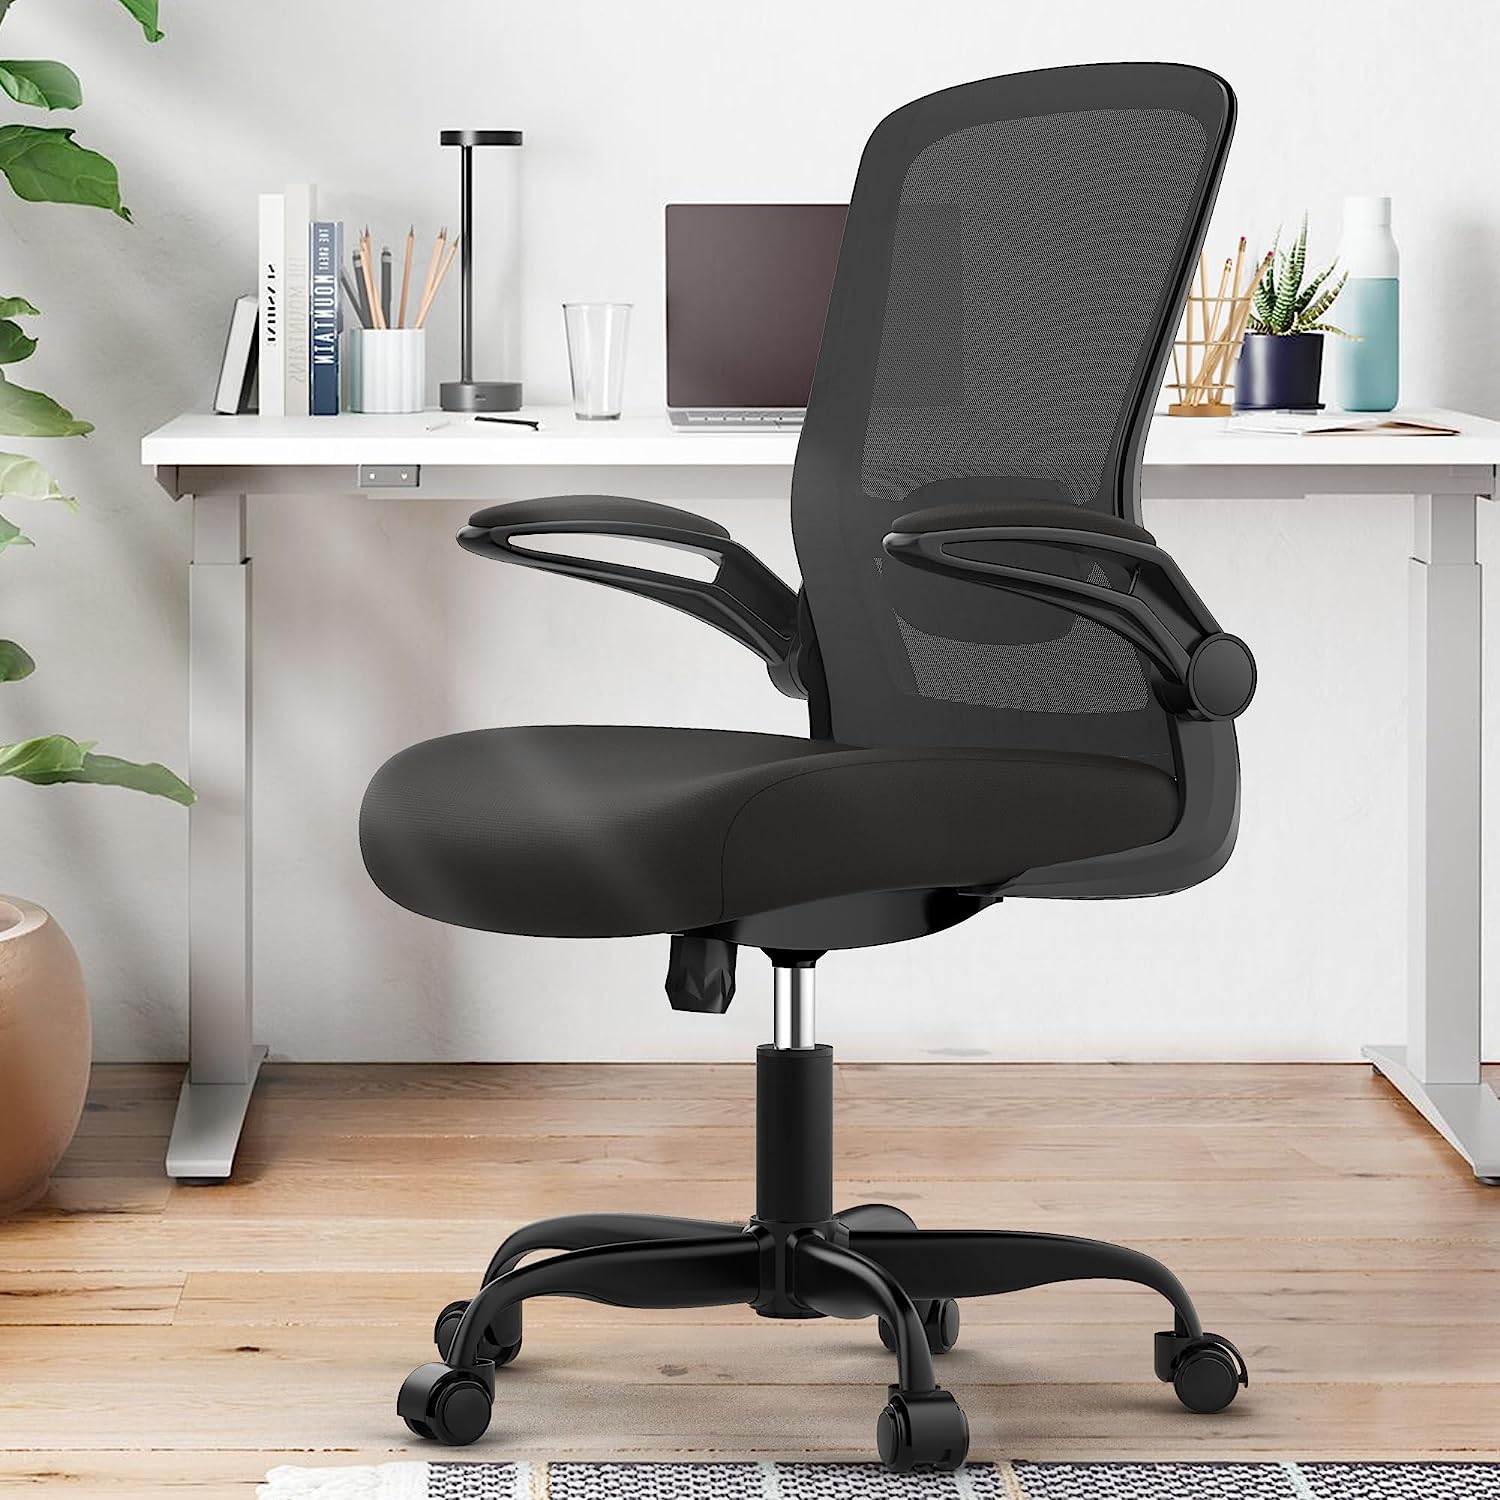 Featured image on the article: How to Choose the Right Office Chair for Your Back